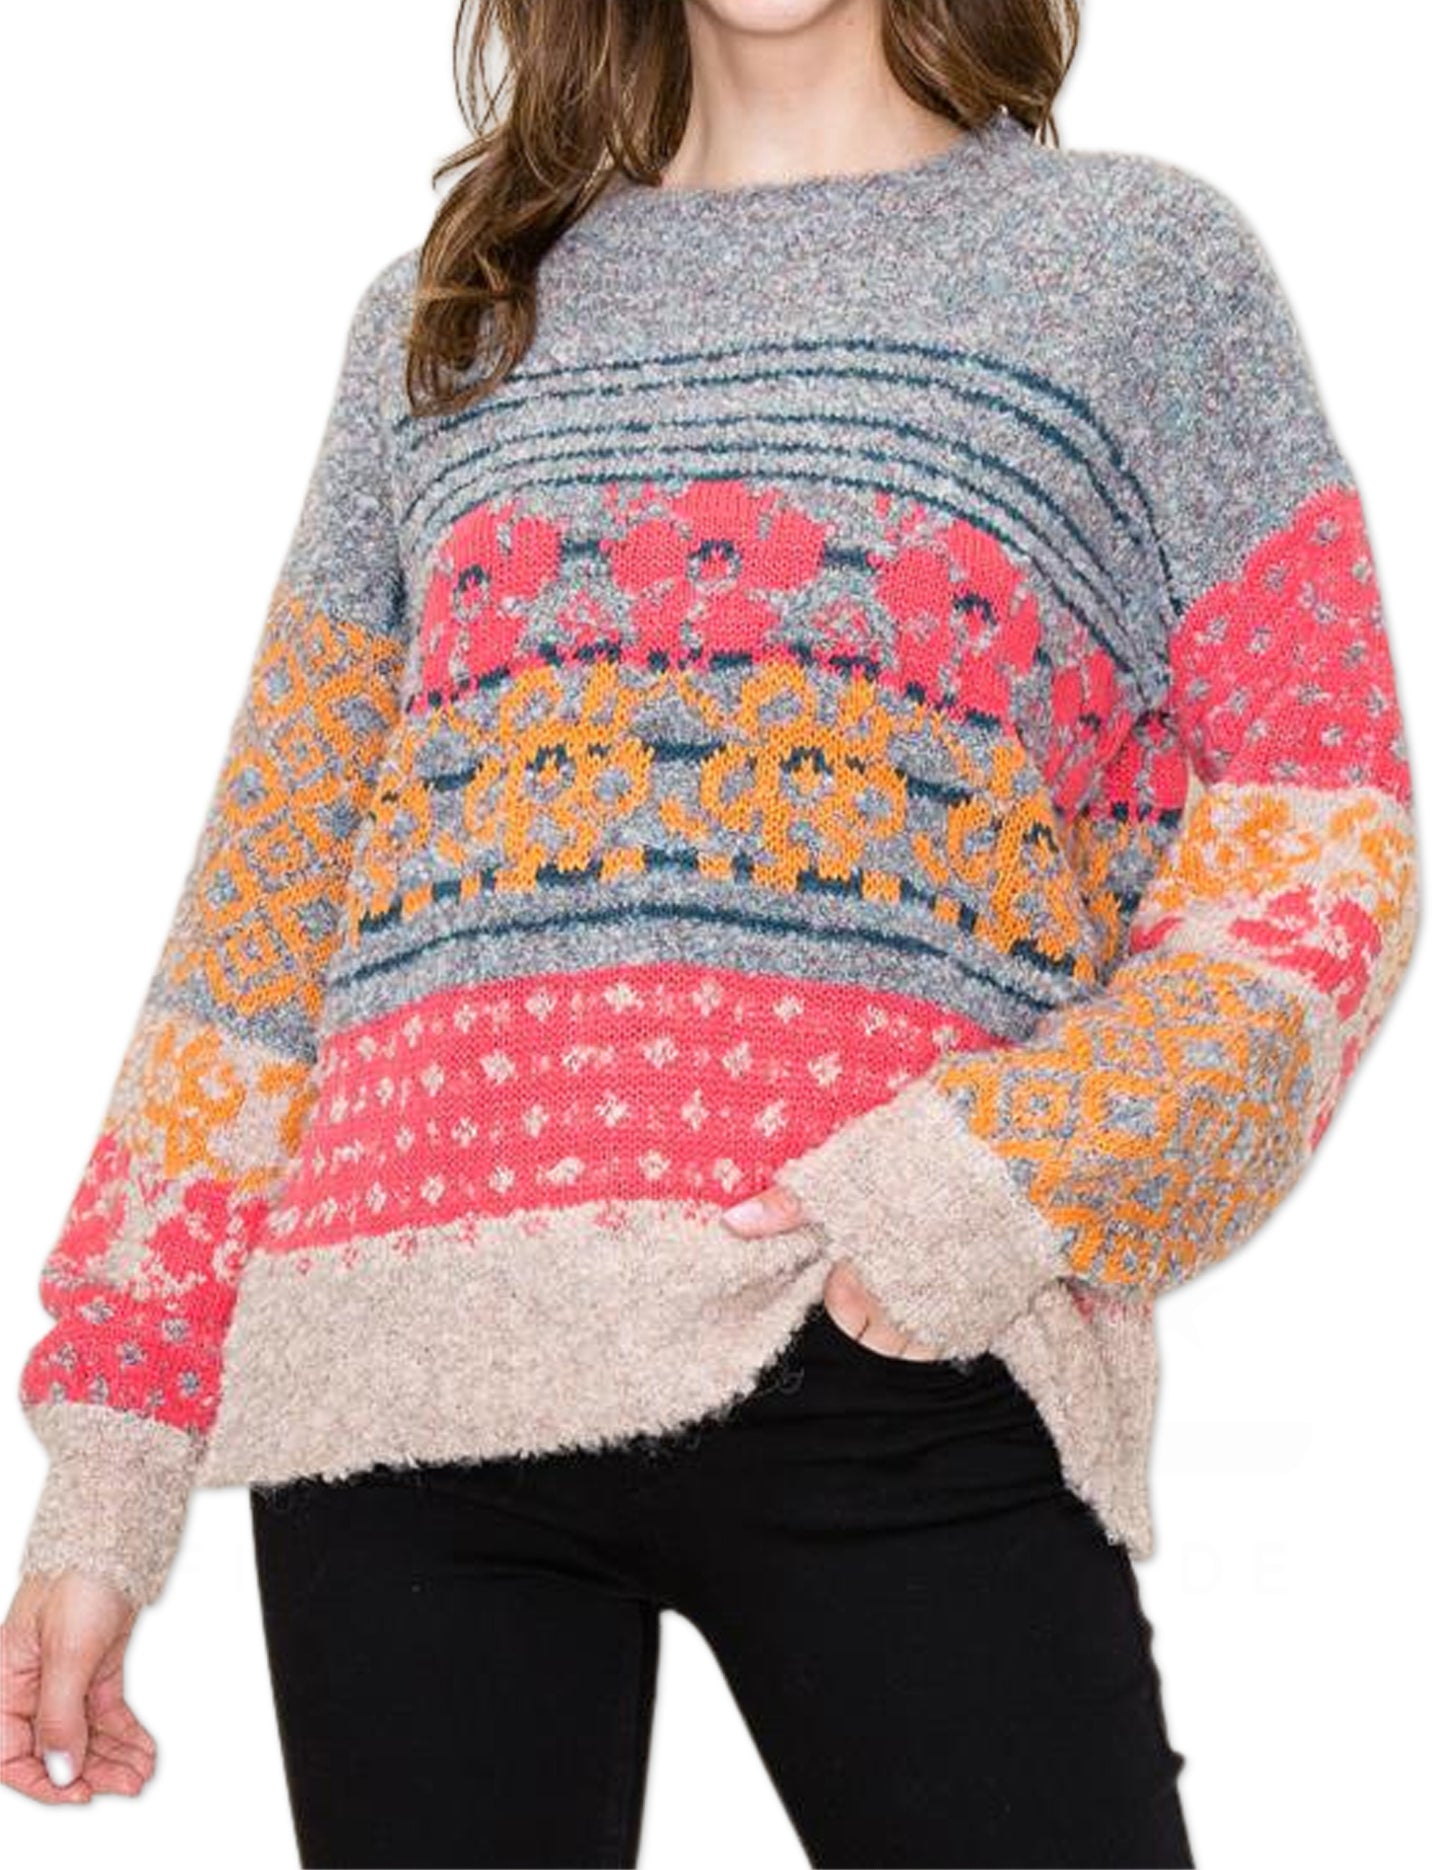 Boucle Yarn Floral and Stripe Sweater - Forest